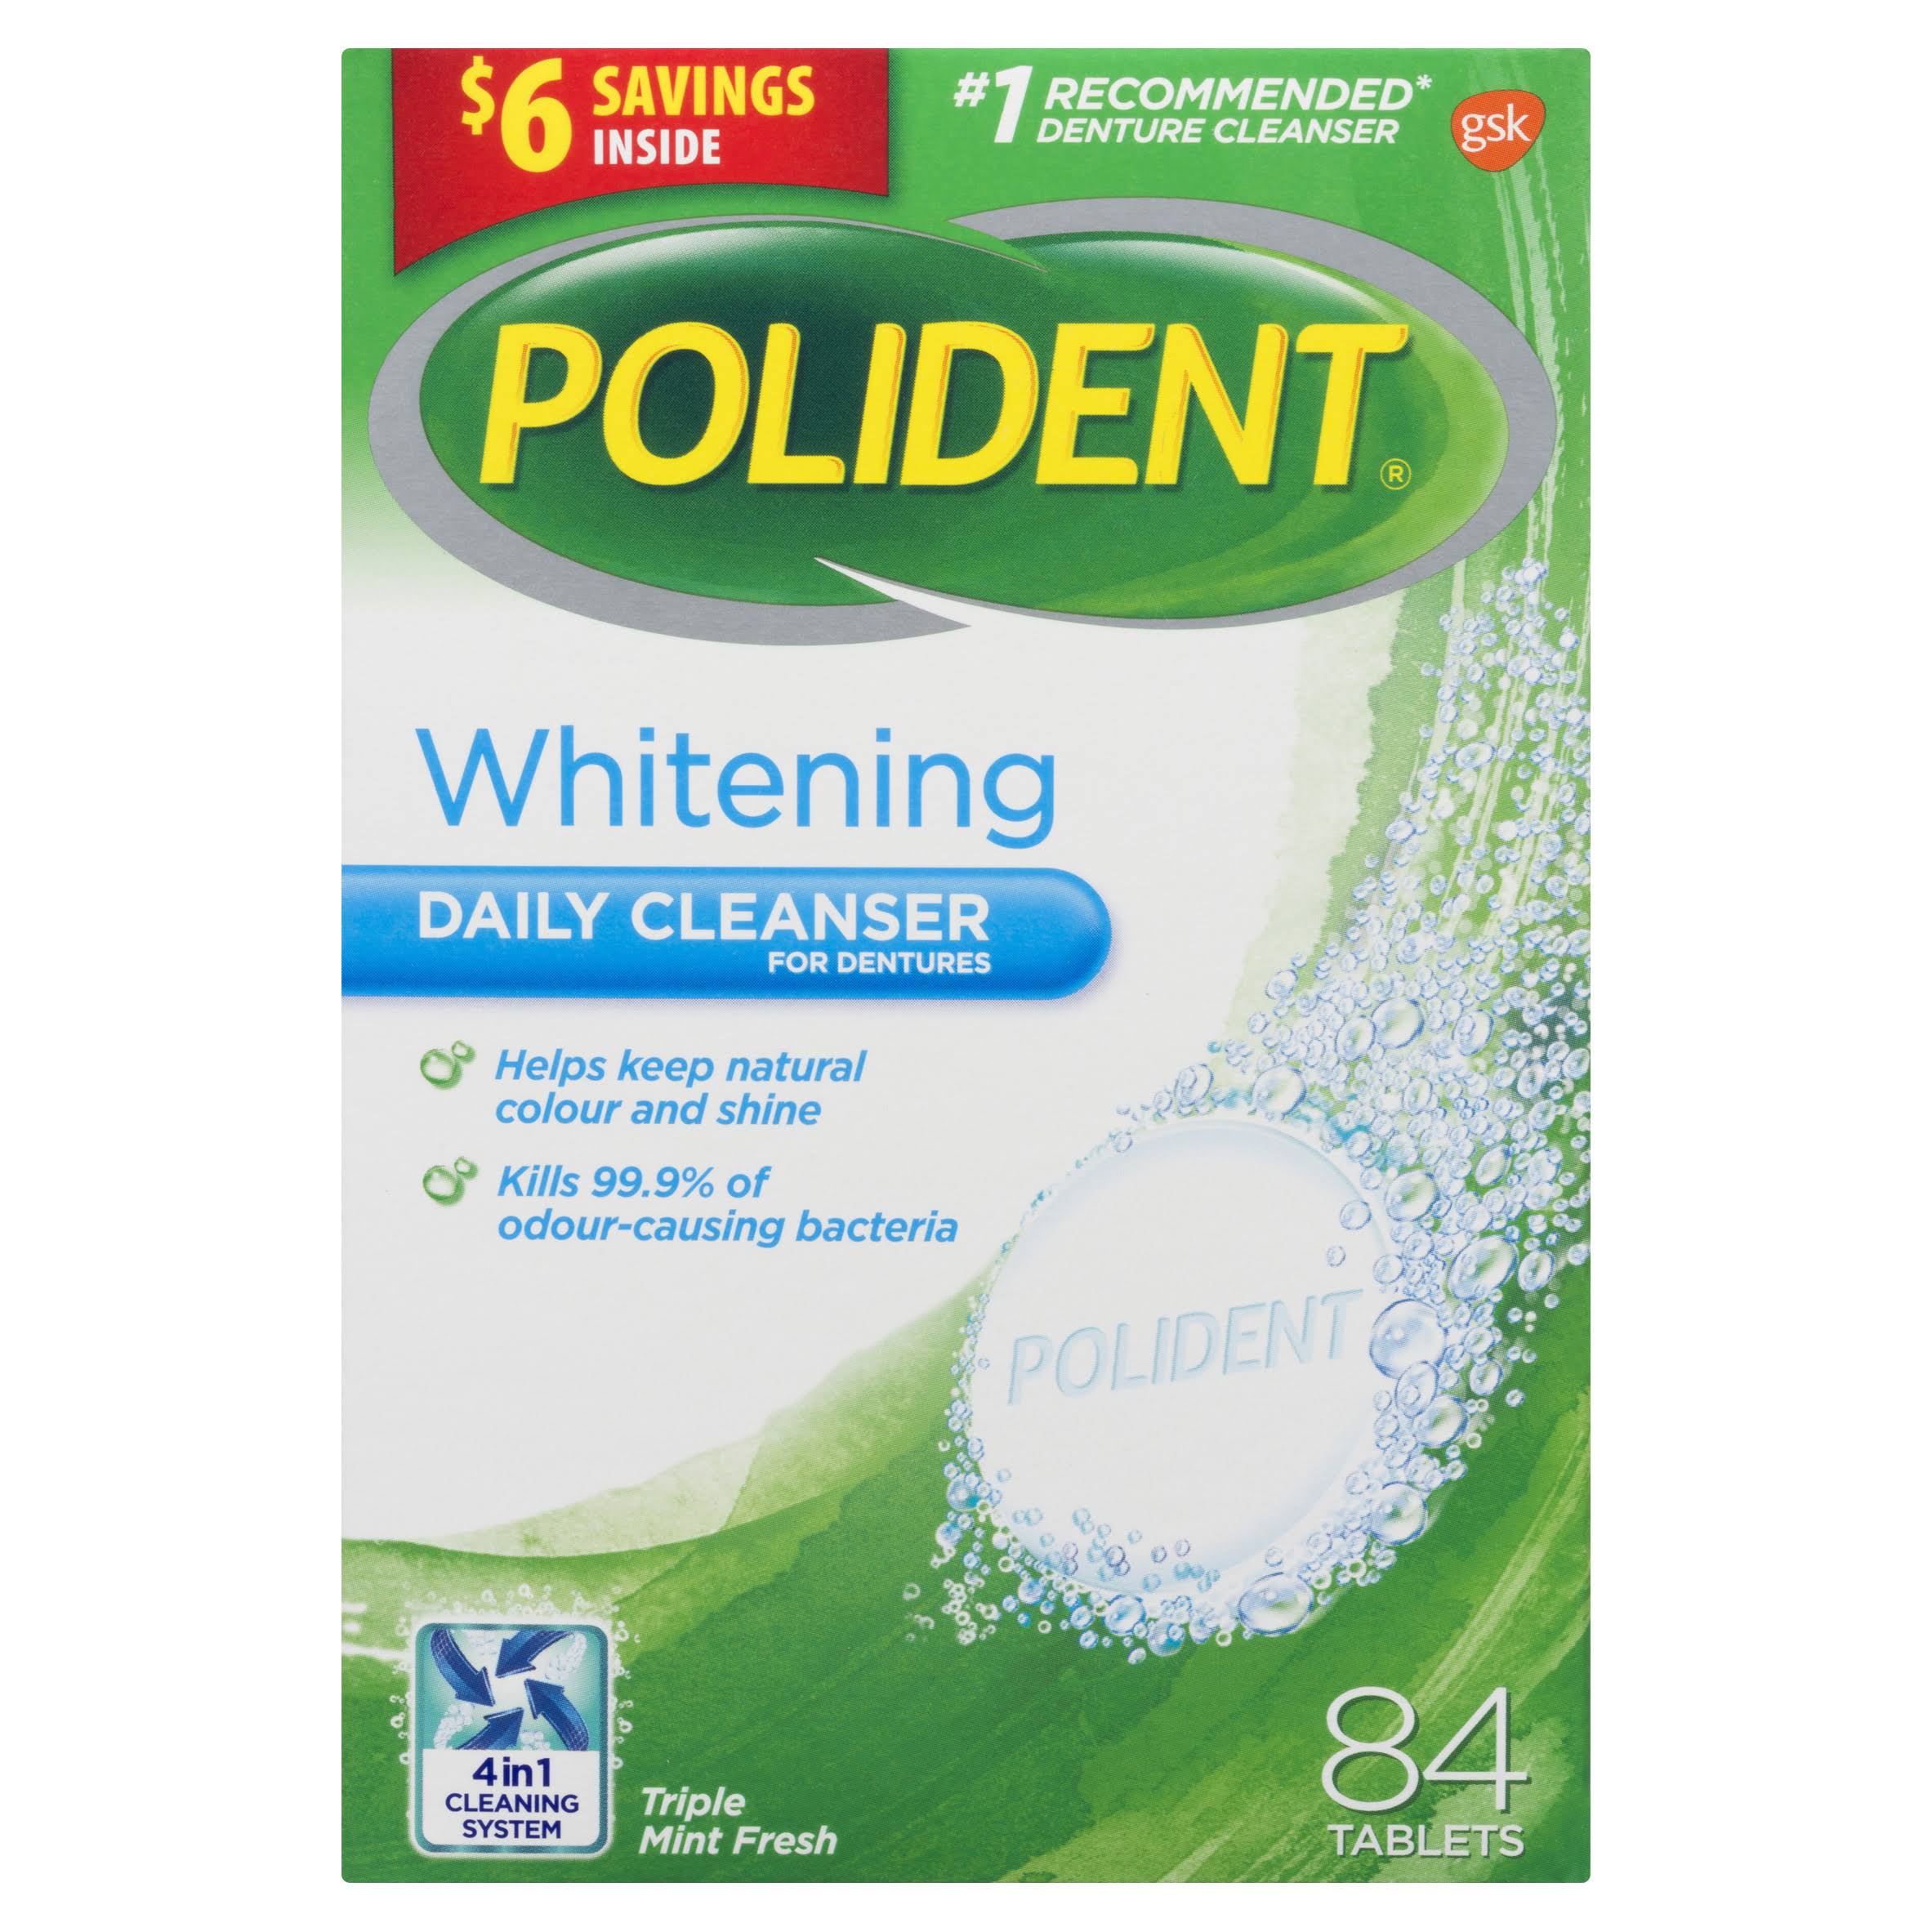 Polident Whitening Daily Cleanser Tablets